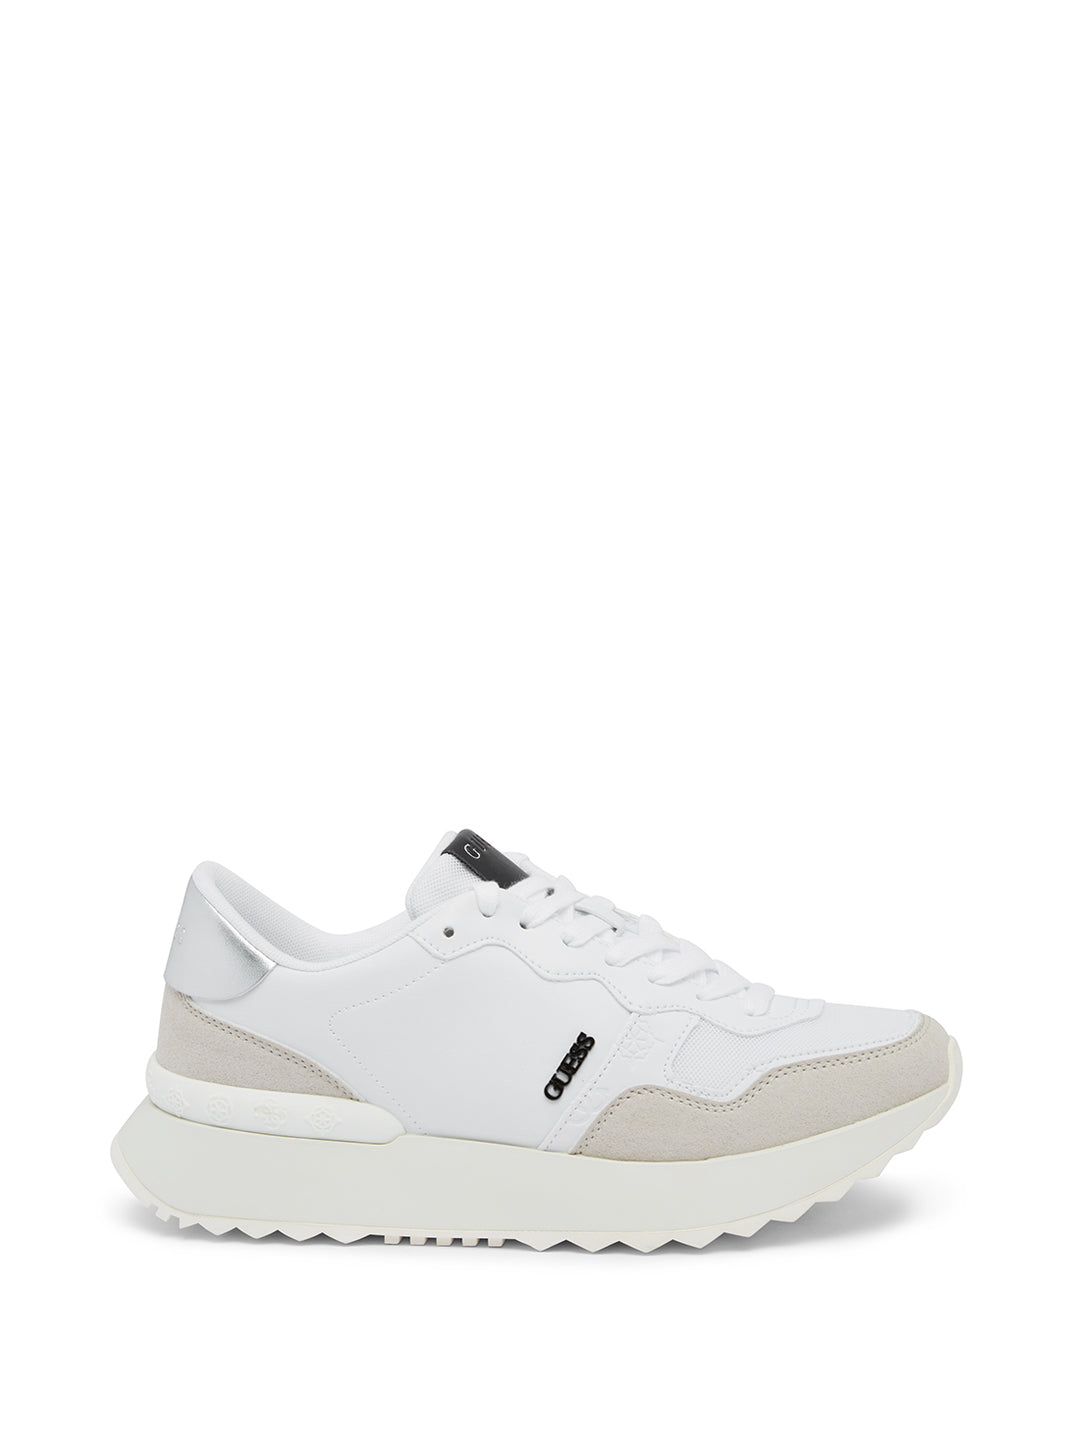 Women's Sneakers | Casual Runners, Trainers & More | GUESS